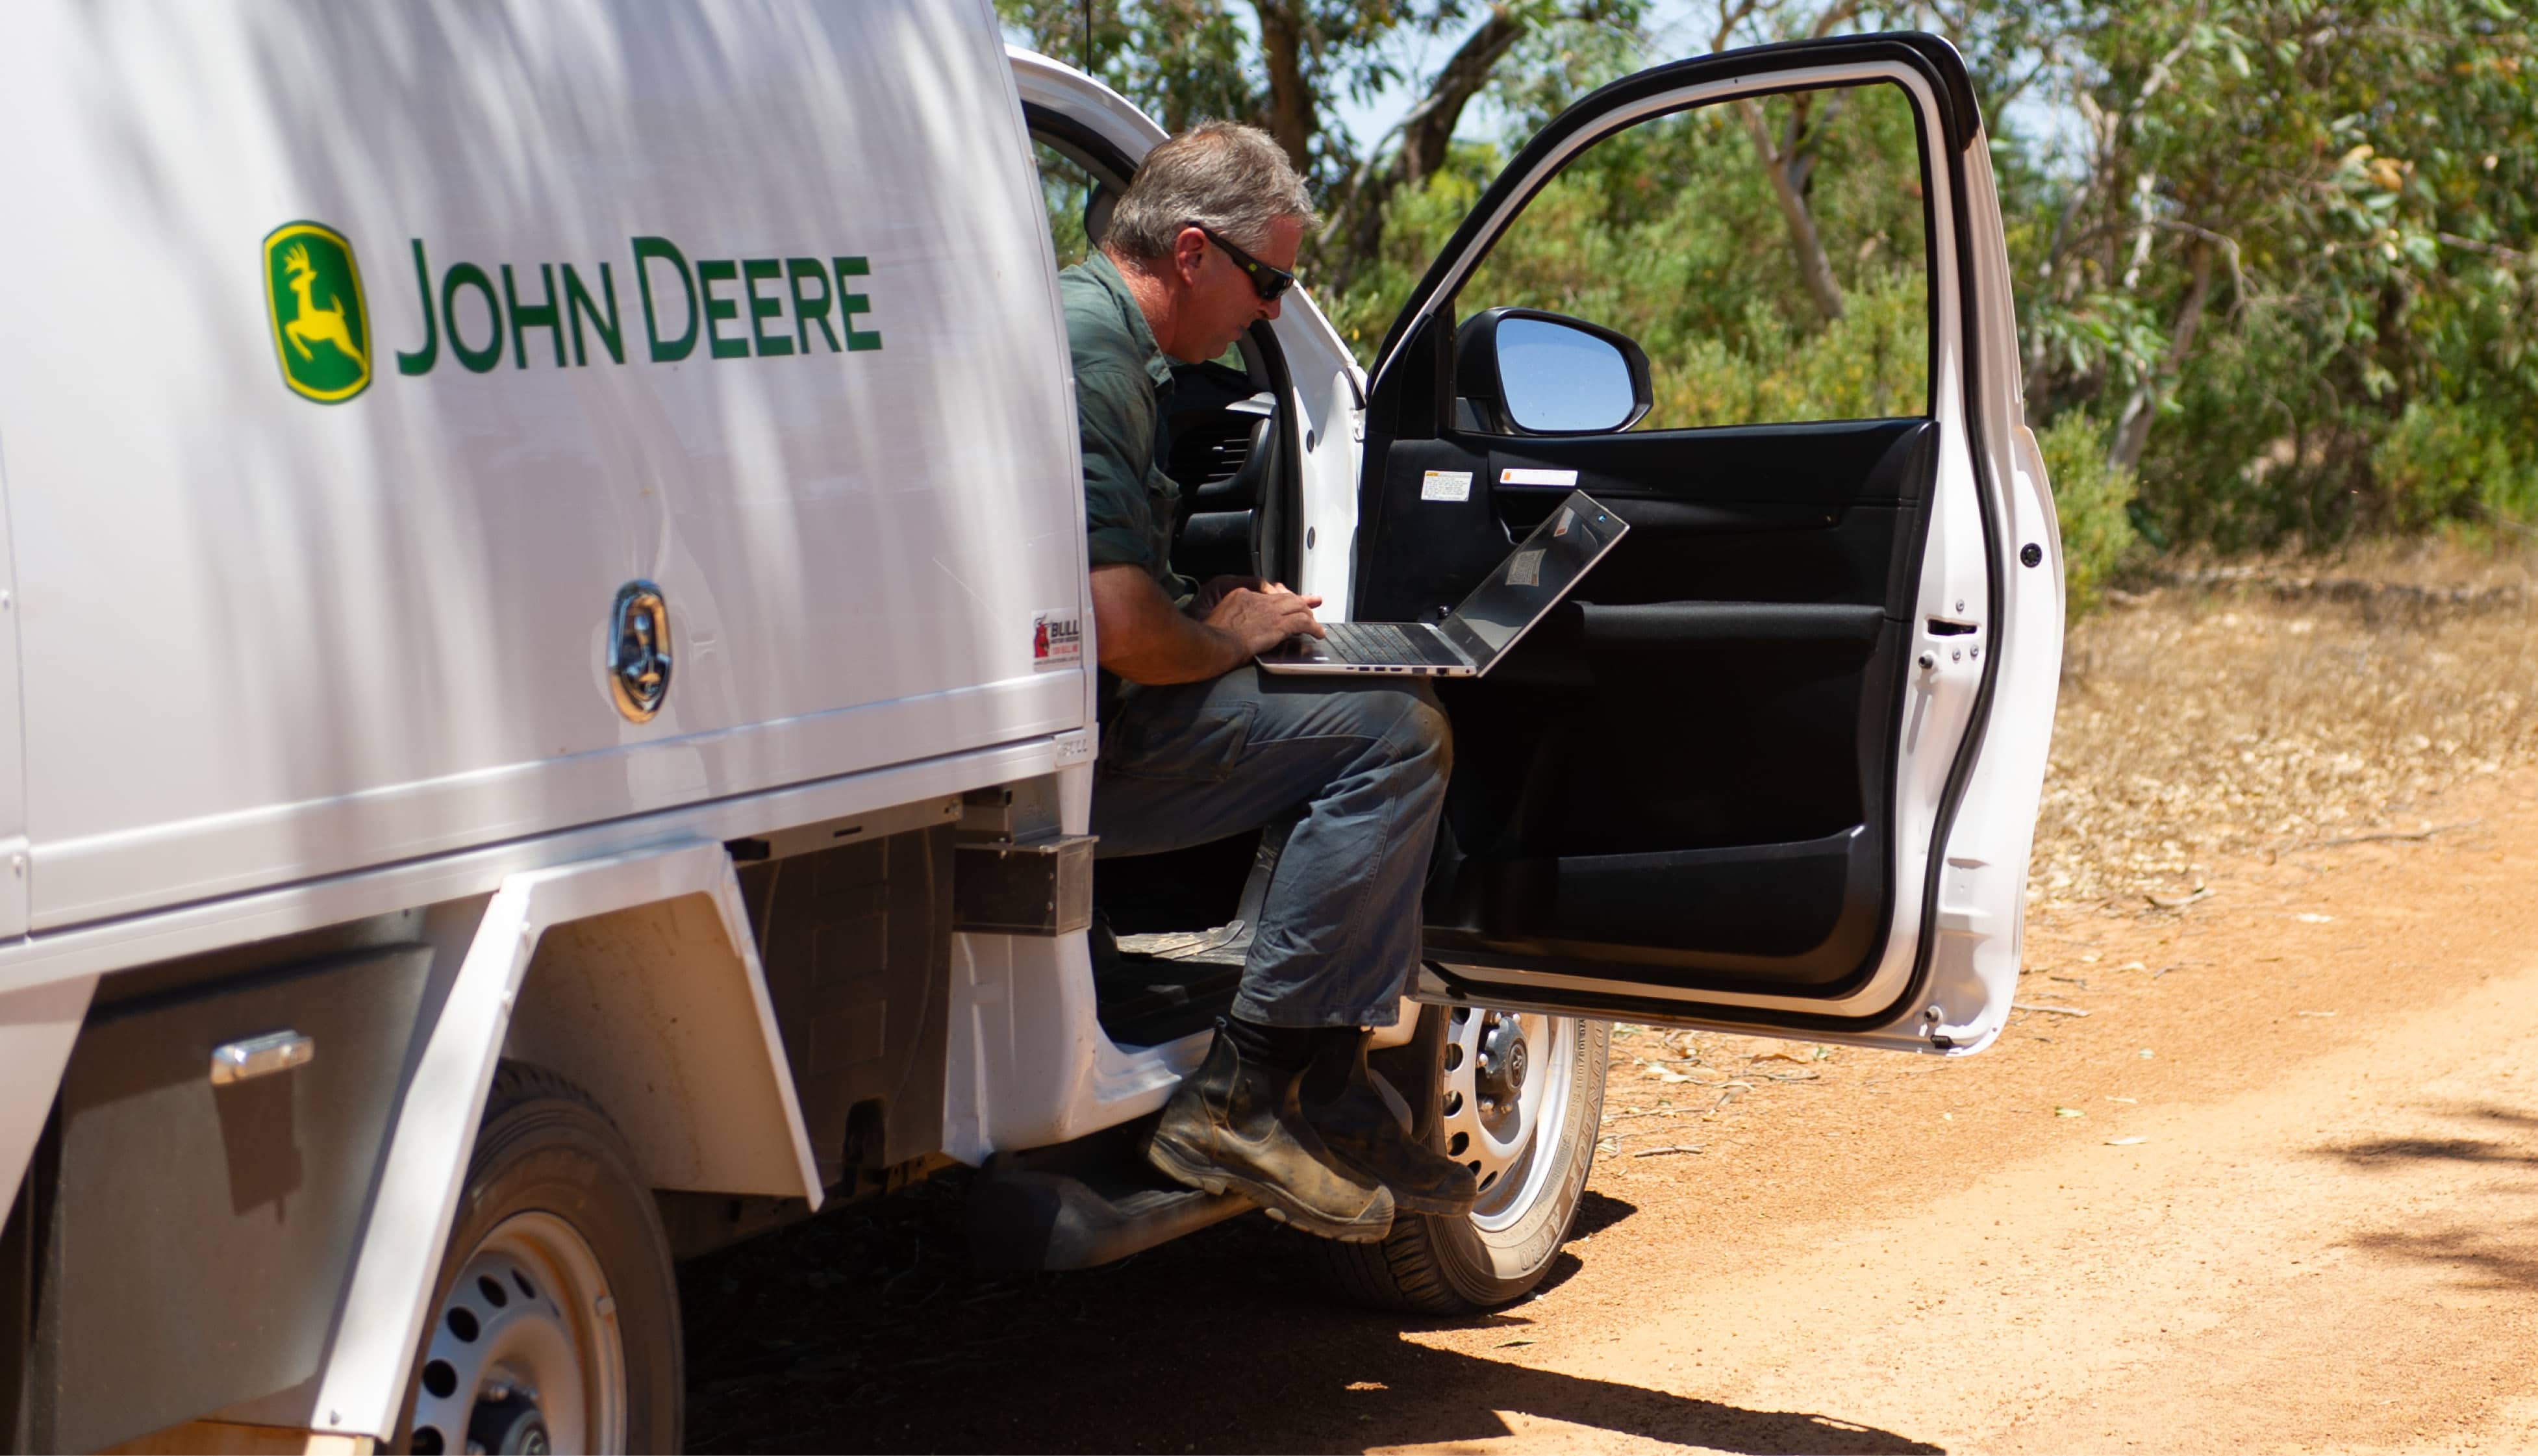 John Deere worker sits in the front of a ute with the door open into the outdoors. He is using a laptop which rests on his lap.